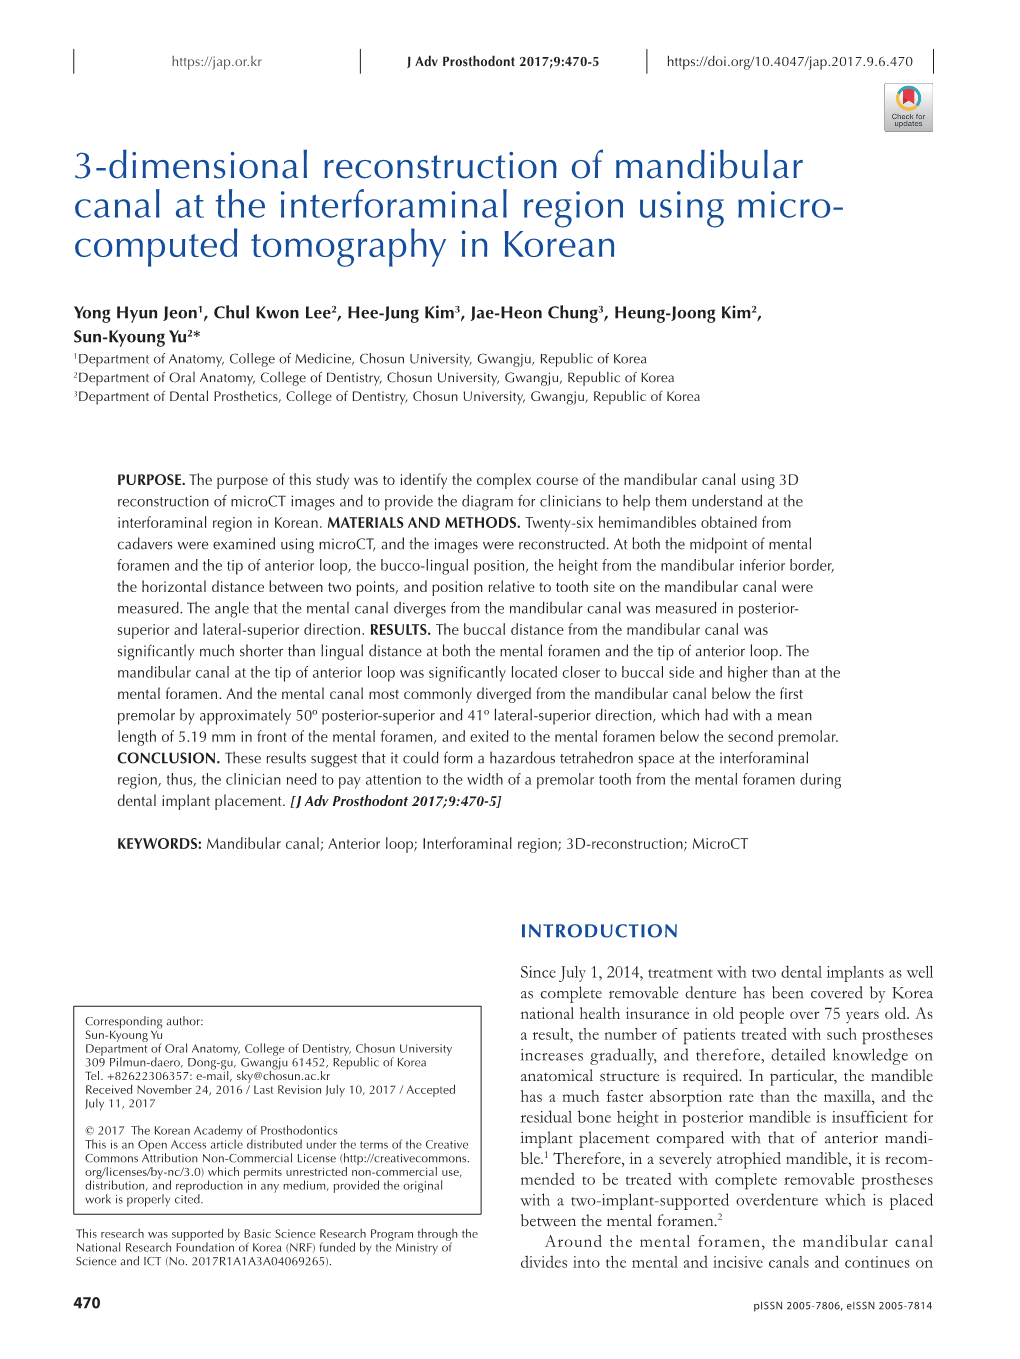 3-Dimensional Reconstruction of Mandibular Canal at the Interforaminal Region Using Micro- Computed Tomography in Korean